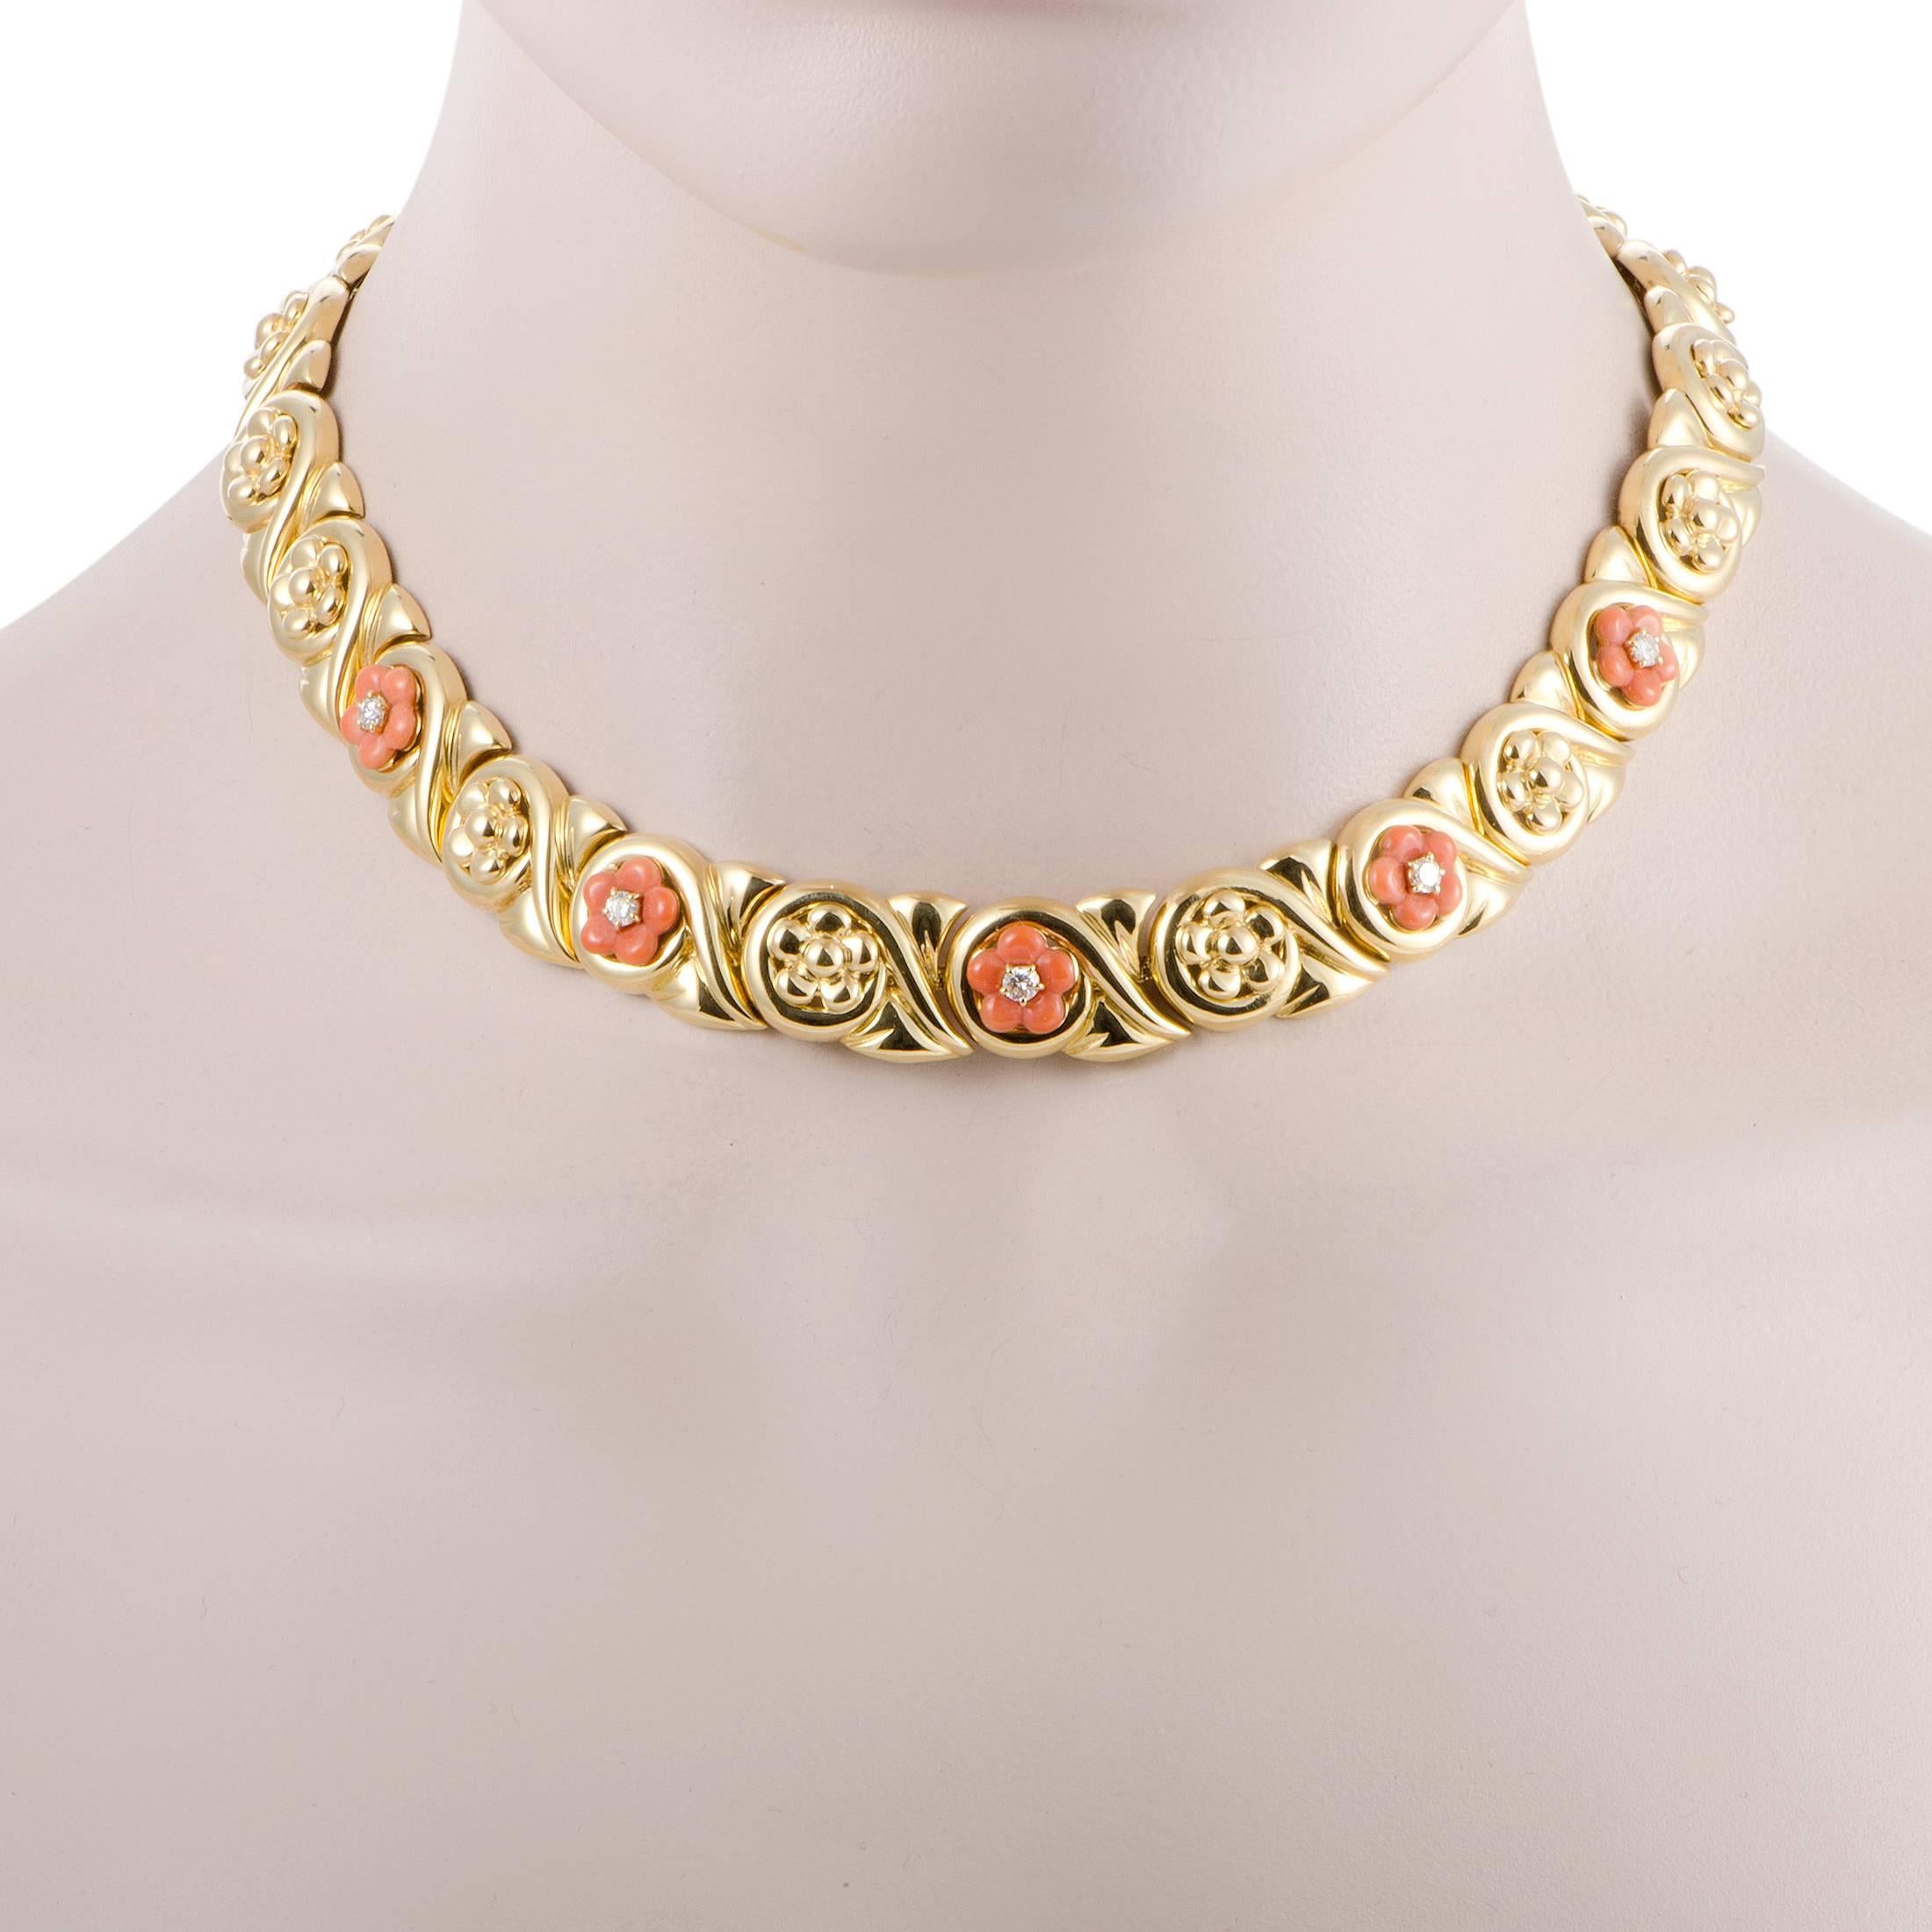 The lovely floral design and the wonderfully complementing materials create a sublime effect in this gorgeous necklace presented by Chaumet that is made of radiant 18K yellow gold decorated with nifty coral flowers, each of them set with a single